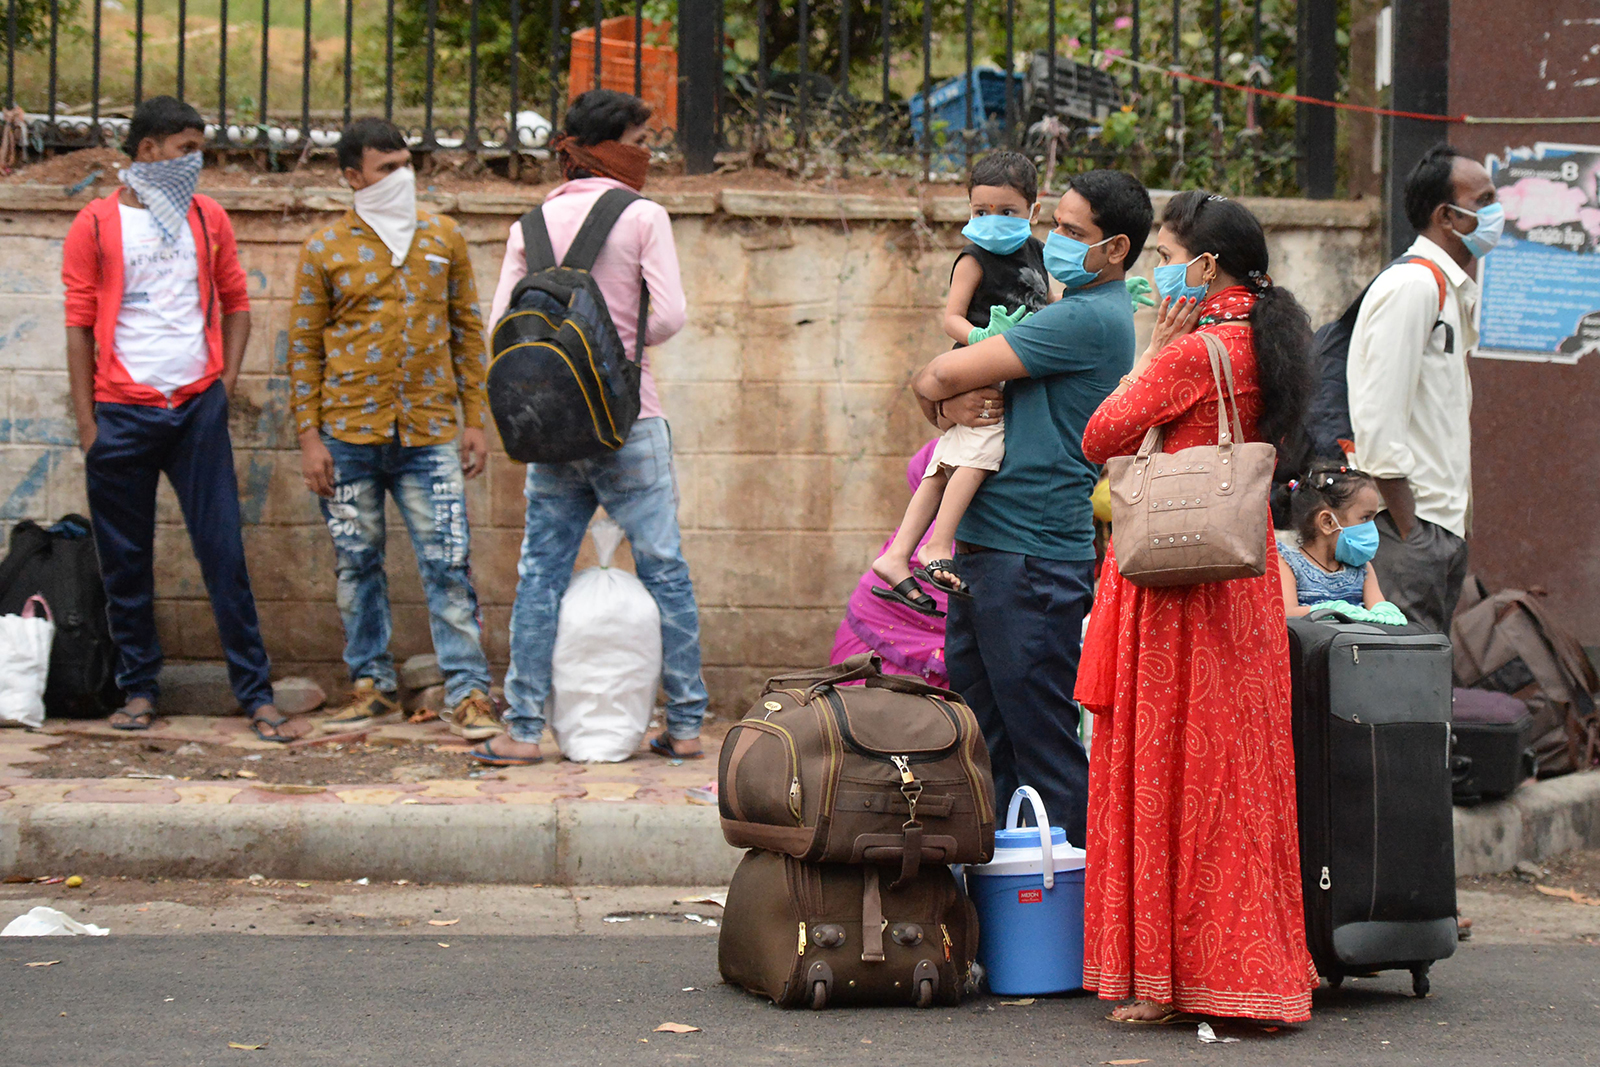 Passengers wearing face masks wait outside a railway station before boarding a train in Secunderabad on June 1.